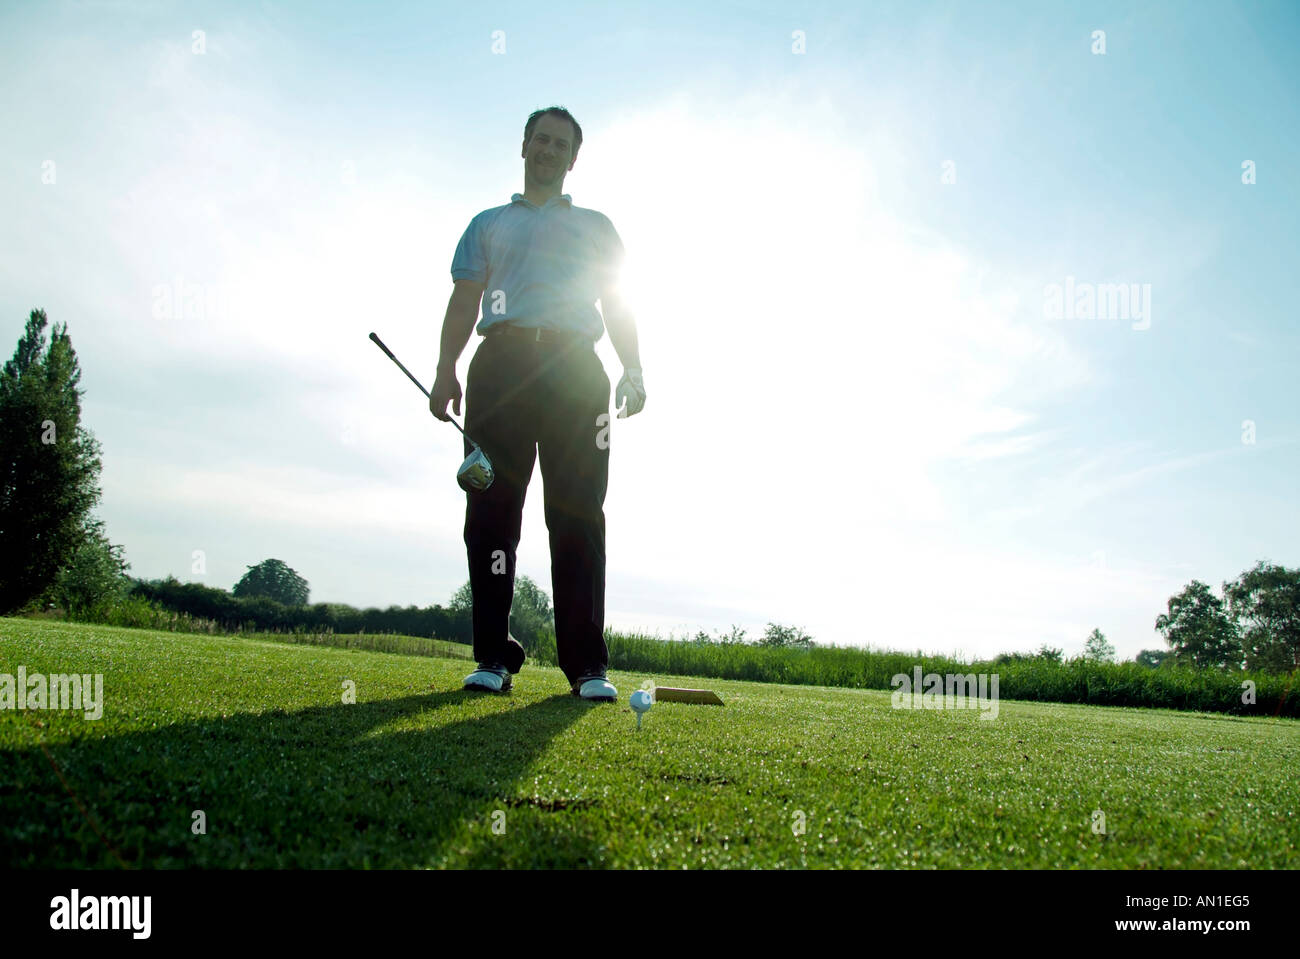 Golf Golfing Golfsport, close-up of a golf player hitting his ball at first hole, backlight Stock Photo